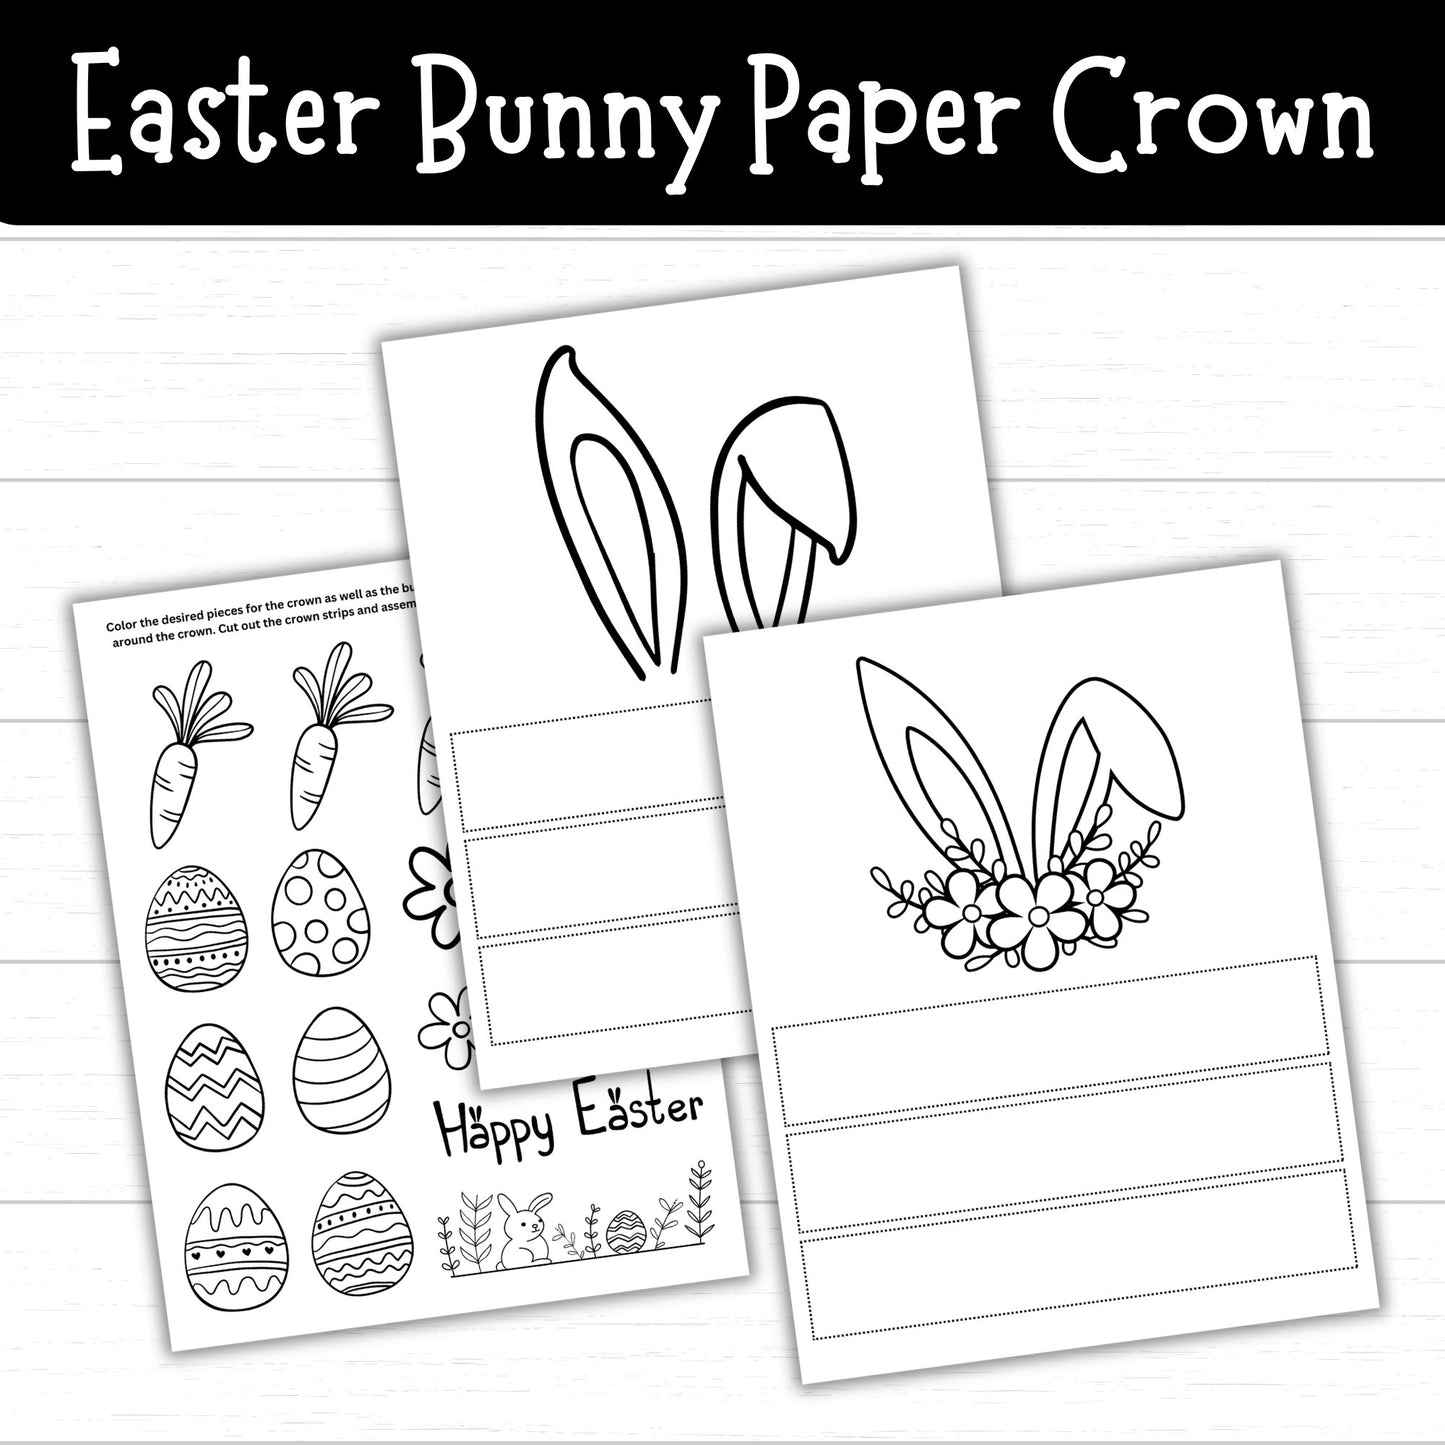 Easter Bunny Paper Crown, Bunny Headband for Kids, Easter Printable, Easter Crafts for Kids, Rabbit Ears, Bunny Crown Cut and Paste Activity